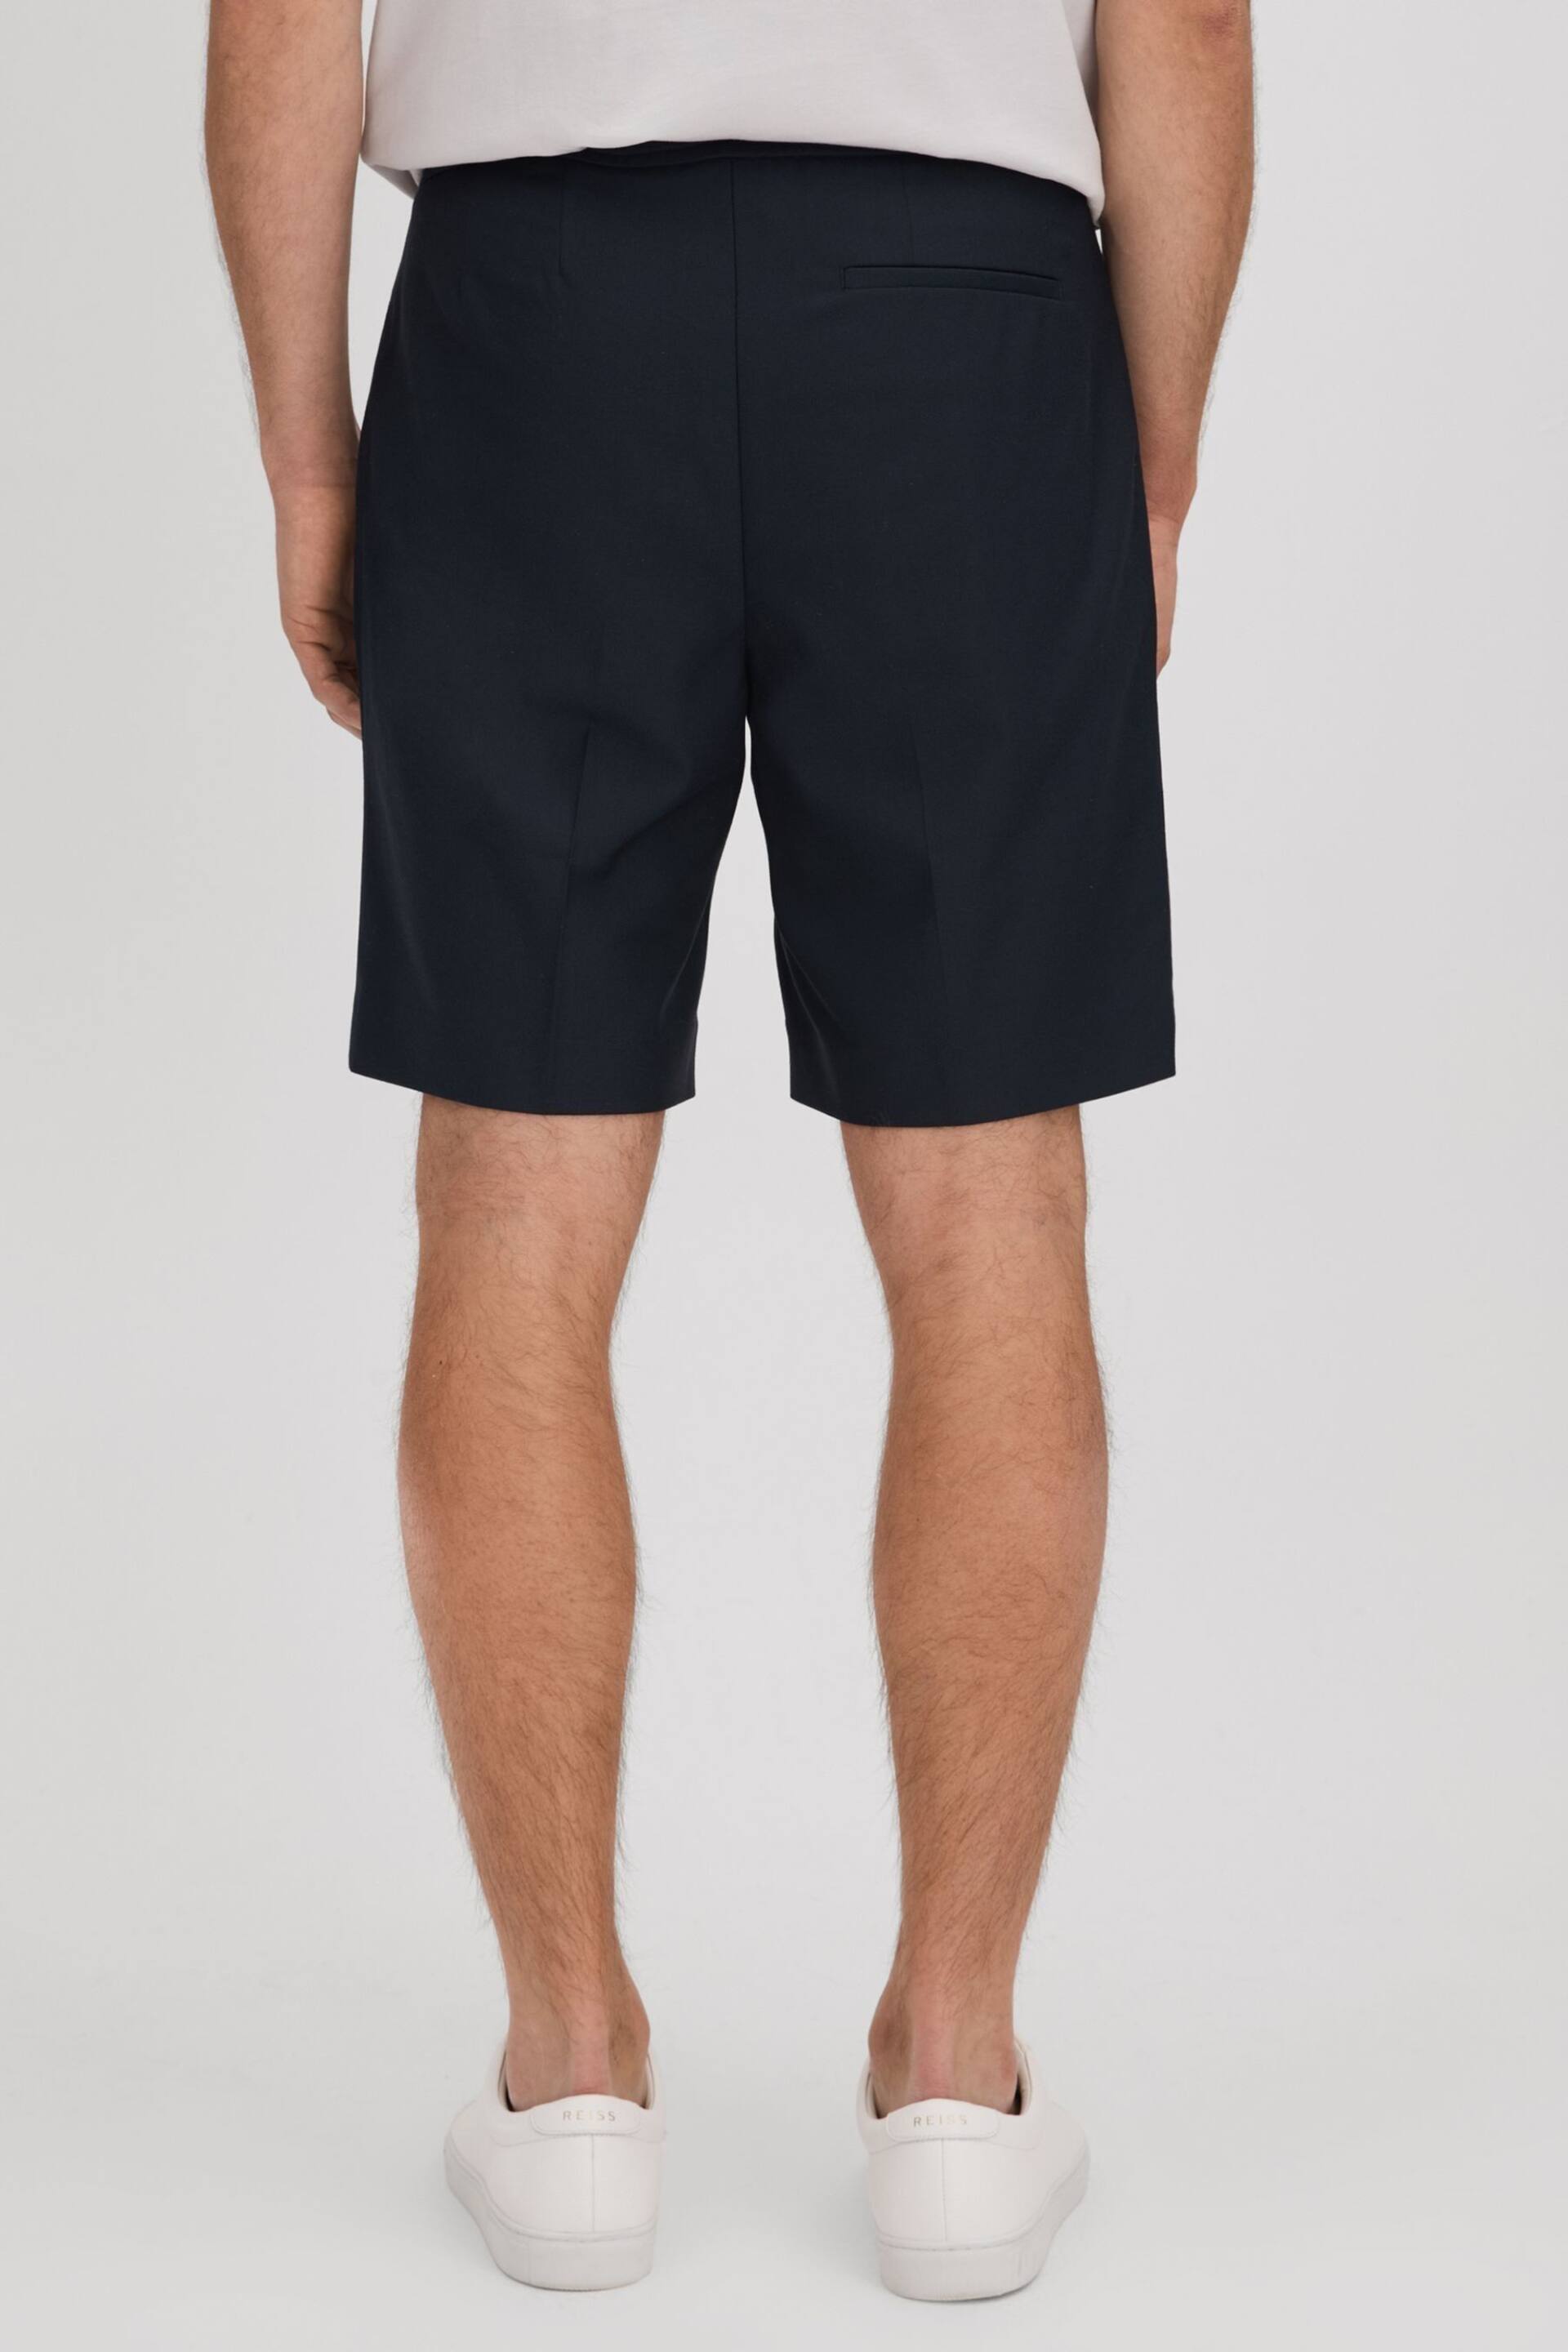 Reiss Navy Sussex Relaxed Drawstring Shorts - Image 5 of 6